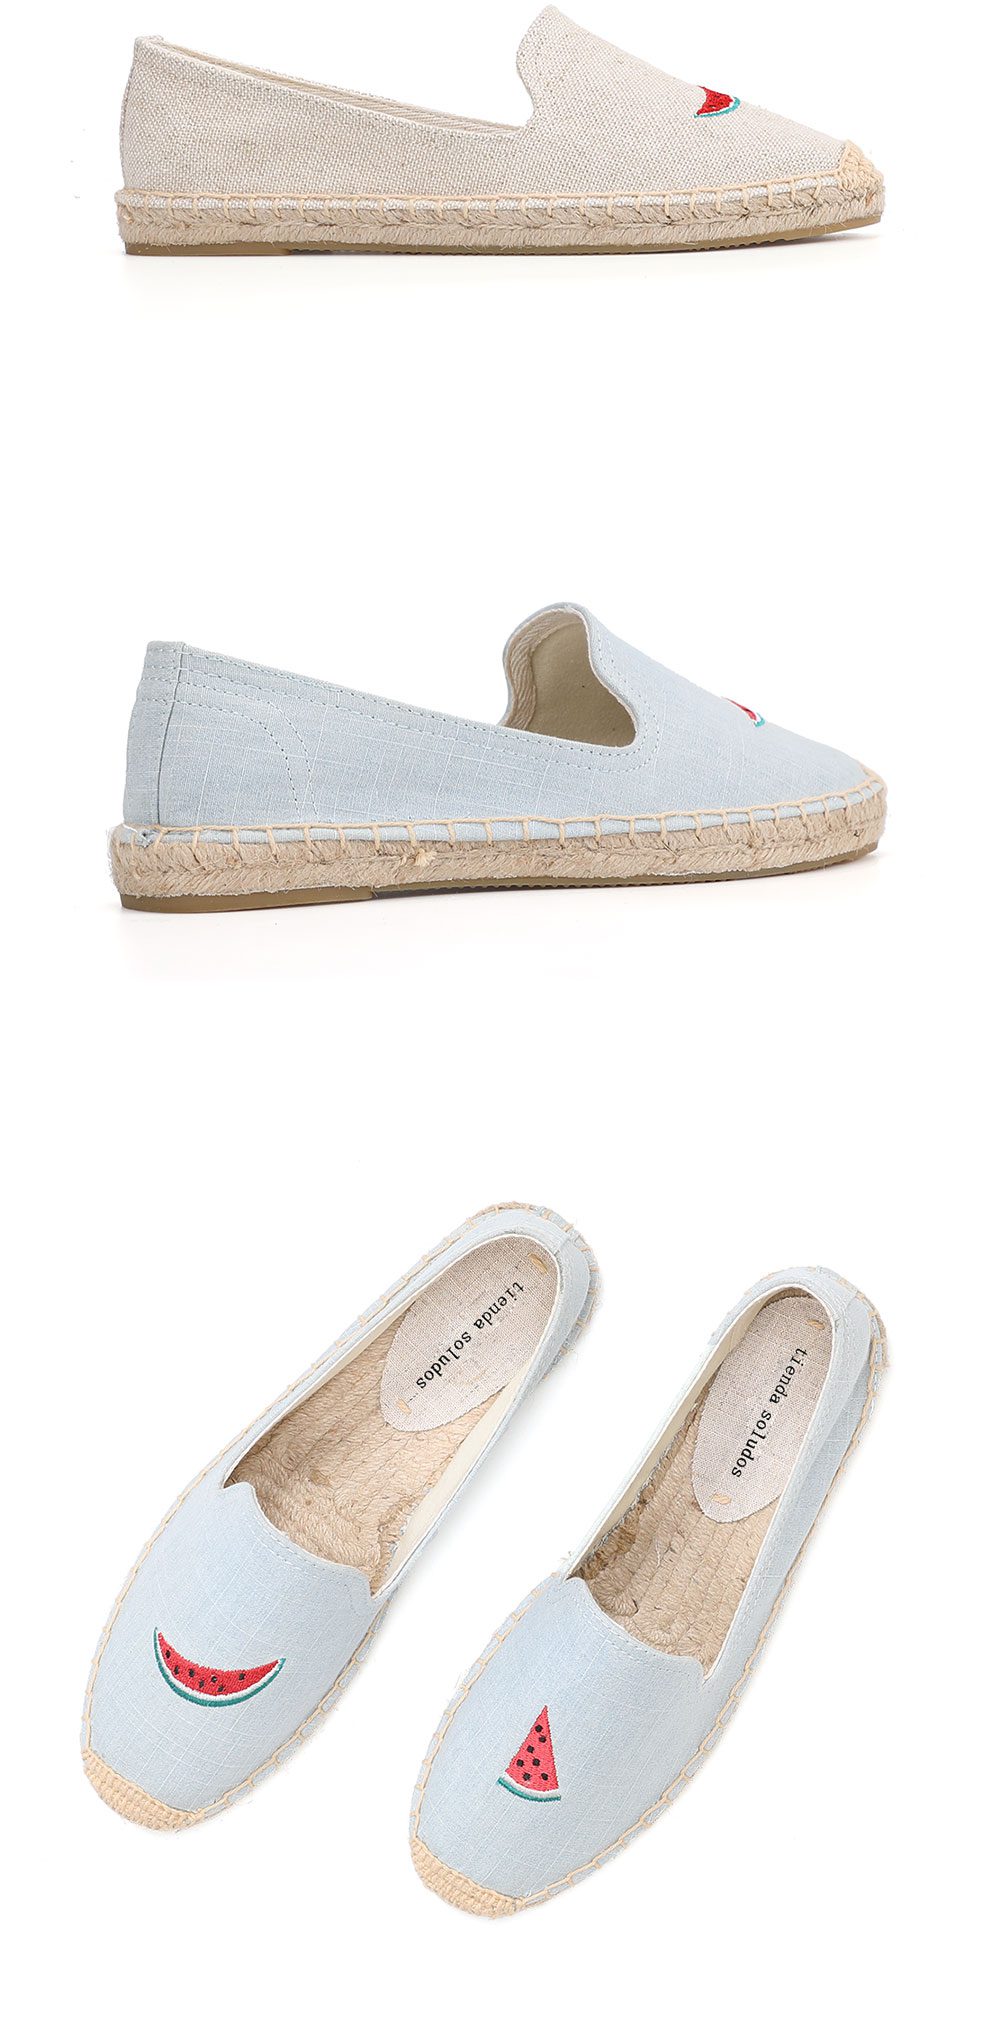 2022 Casual Rubber Espadrilles For Flat Embroidered New Special Offer Ballet Flats Hemp Cotton Fabric Sapatos Zapatillas Mujer